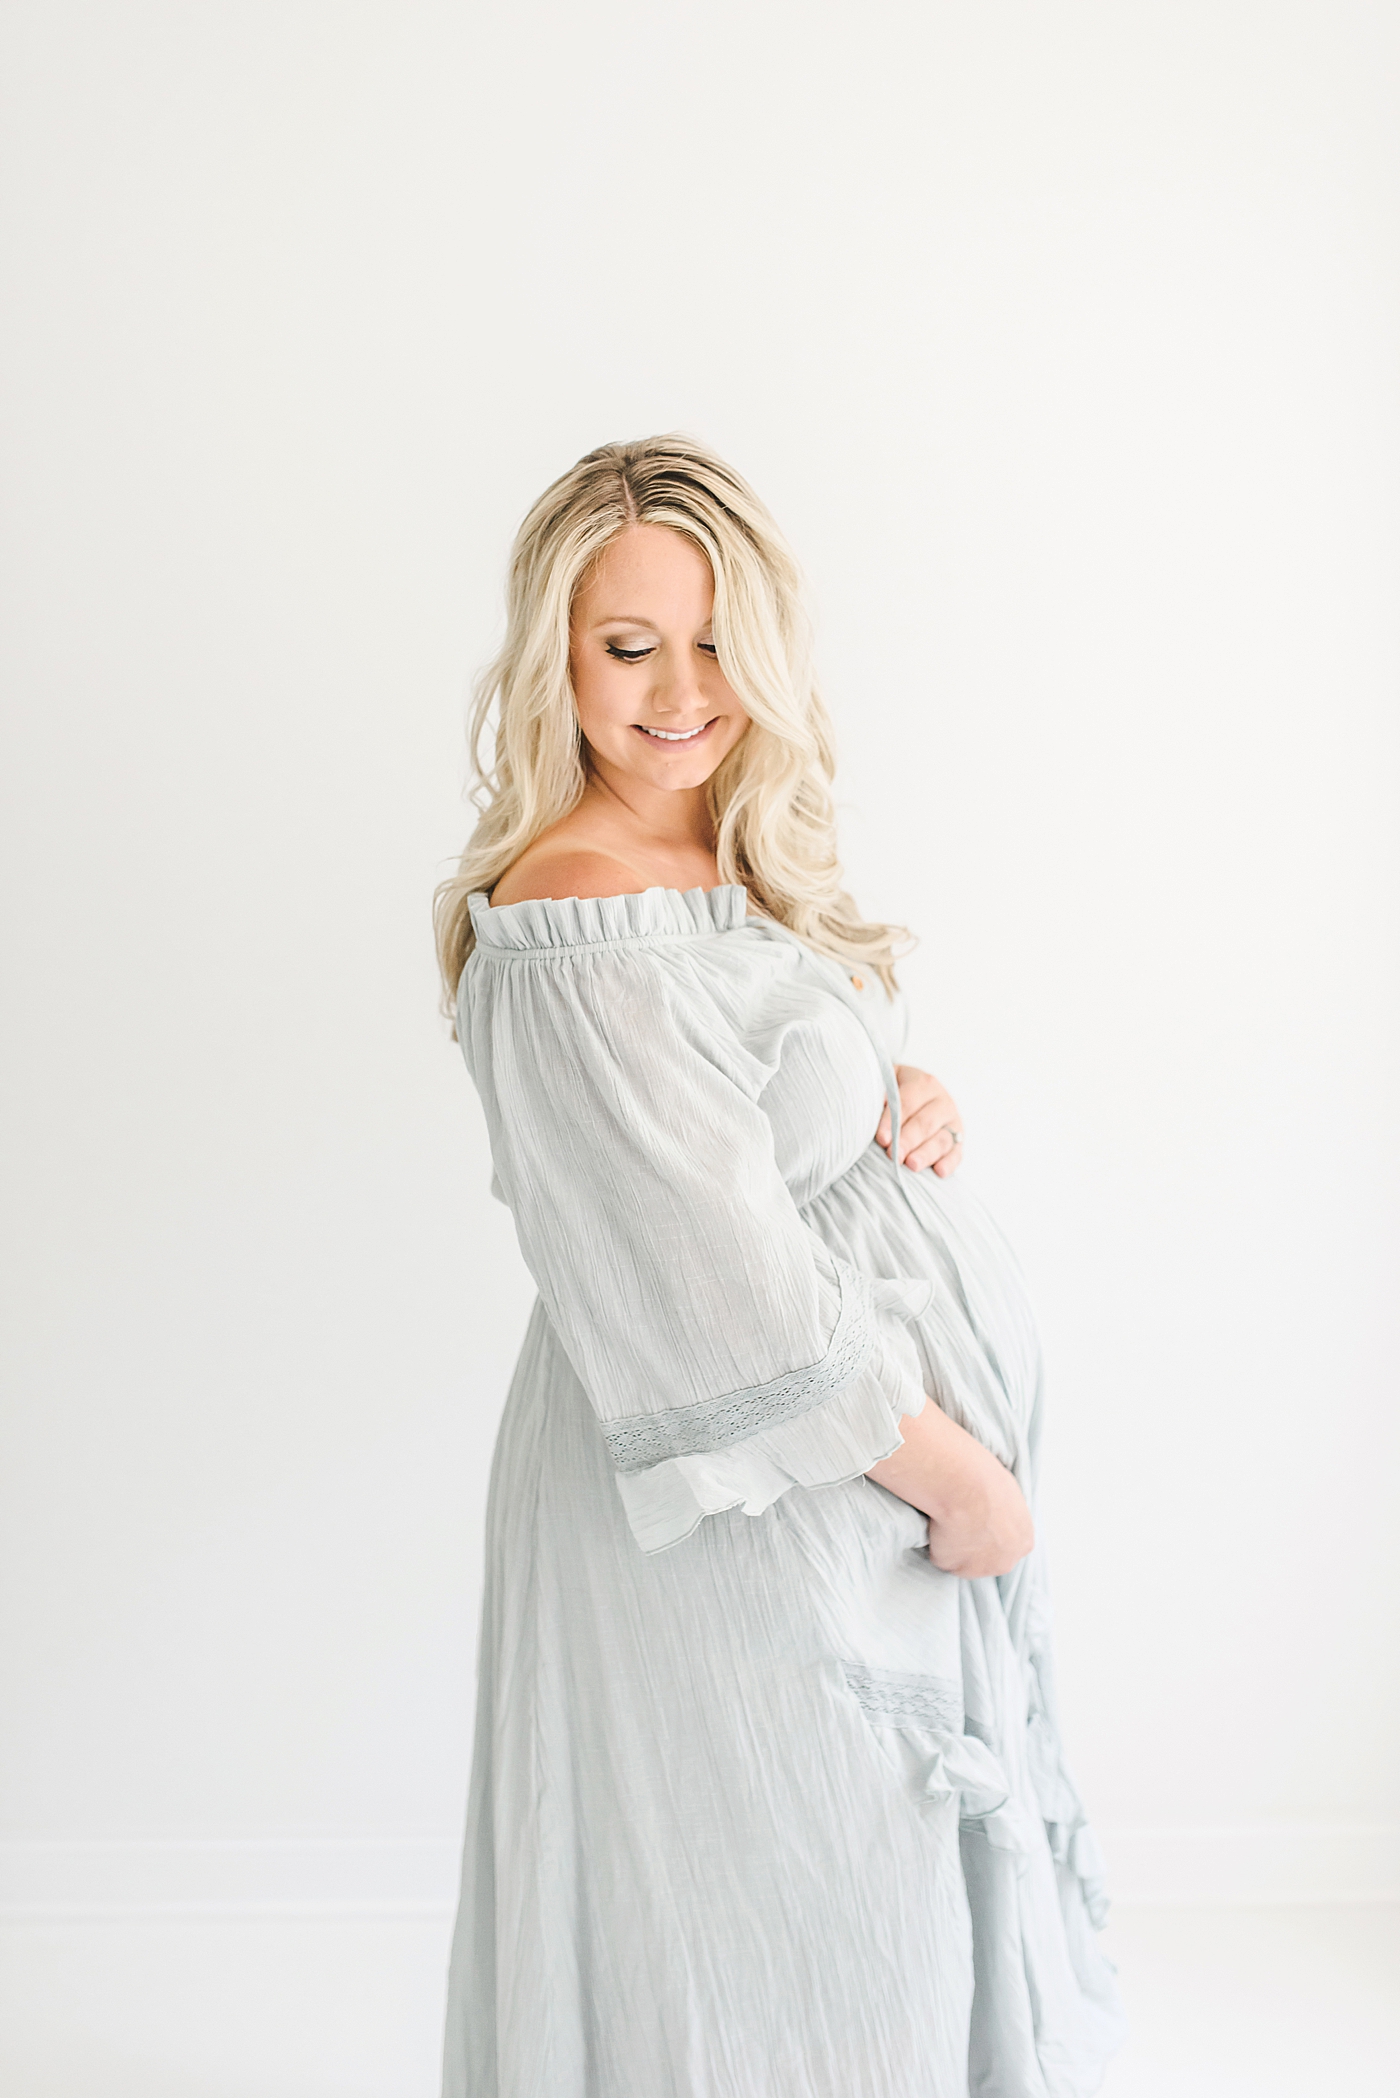 Mother to be in pale blue dress | Photo by Huntersville Newborn Photographer Anna Wisjo 